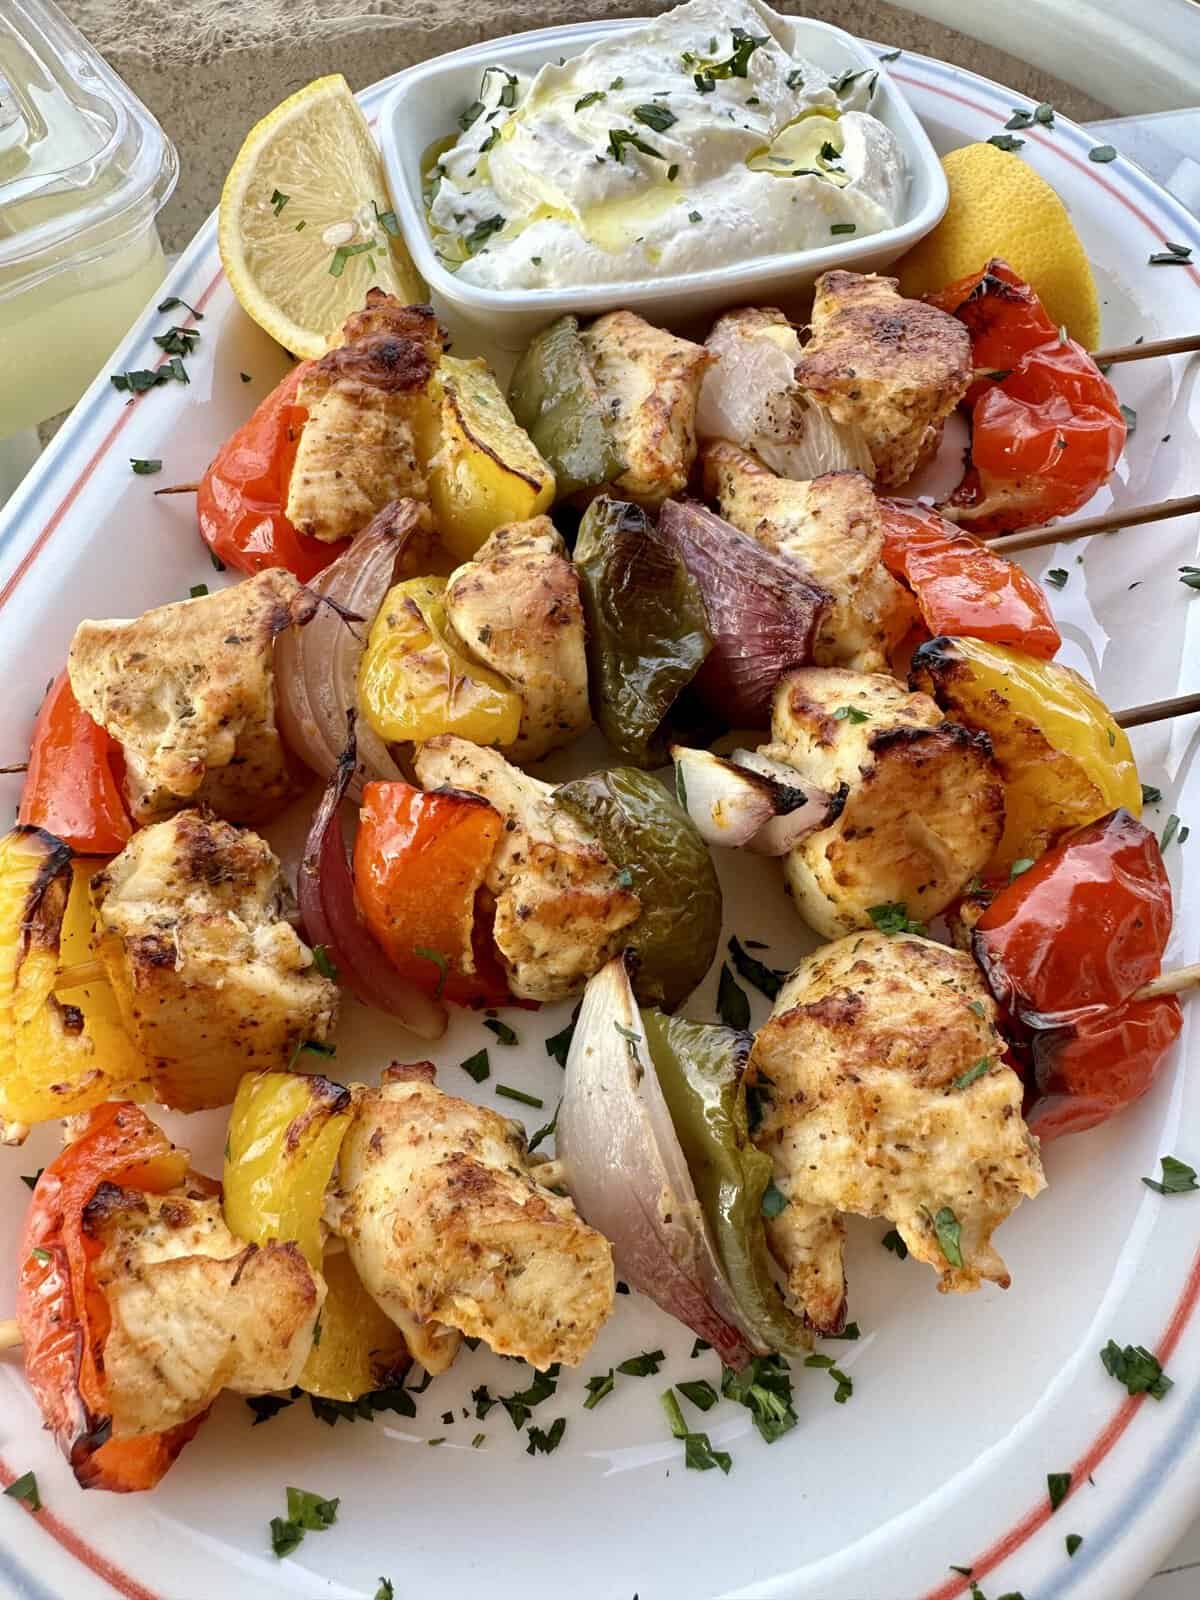 15-Minute Air Fryer Chicken Kabobs (Chicken Skewers) - Hungry Paprikas